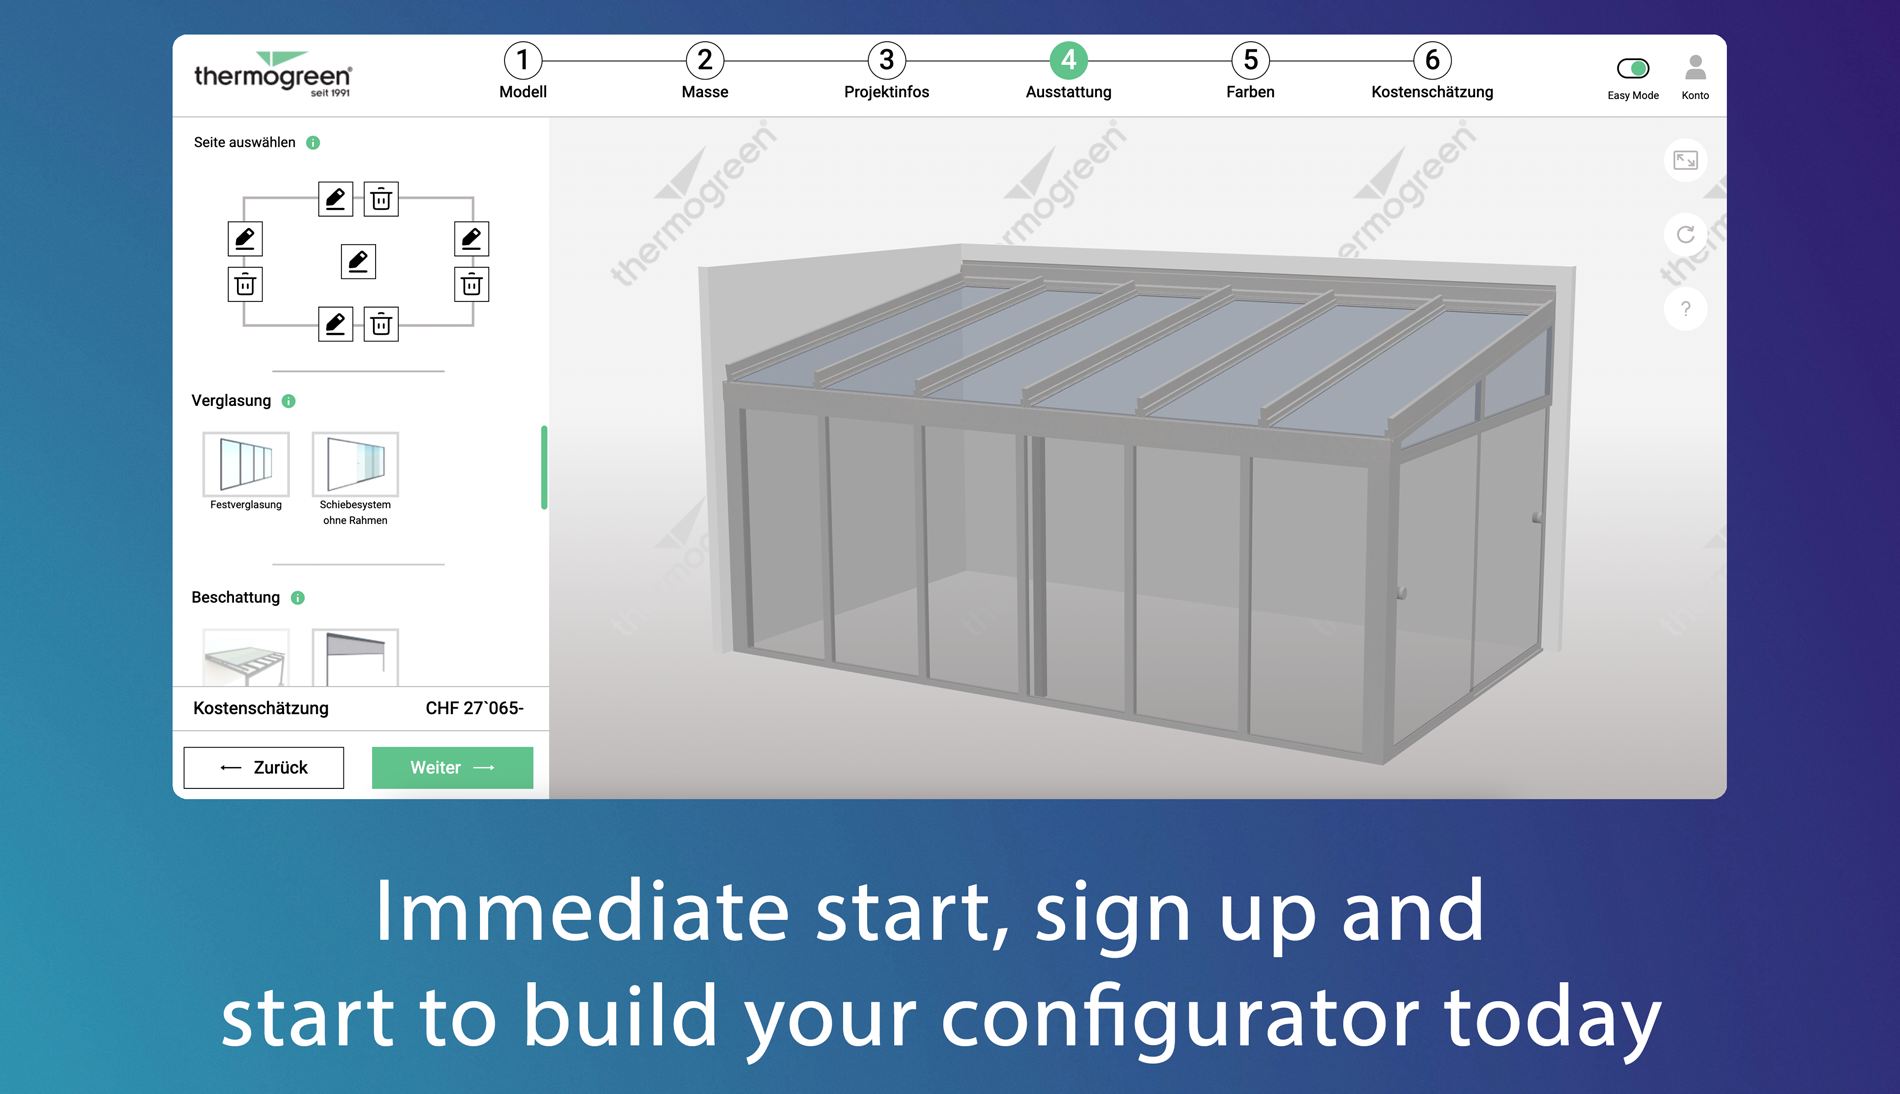 Immediate start, sign up and start to build your configurator